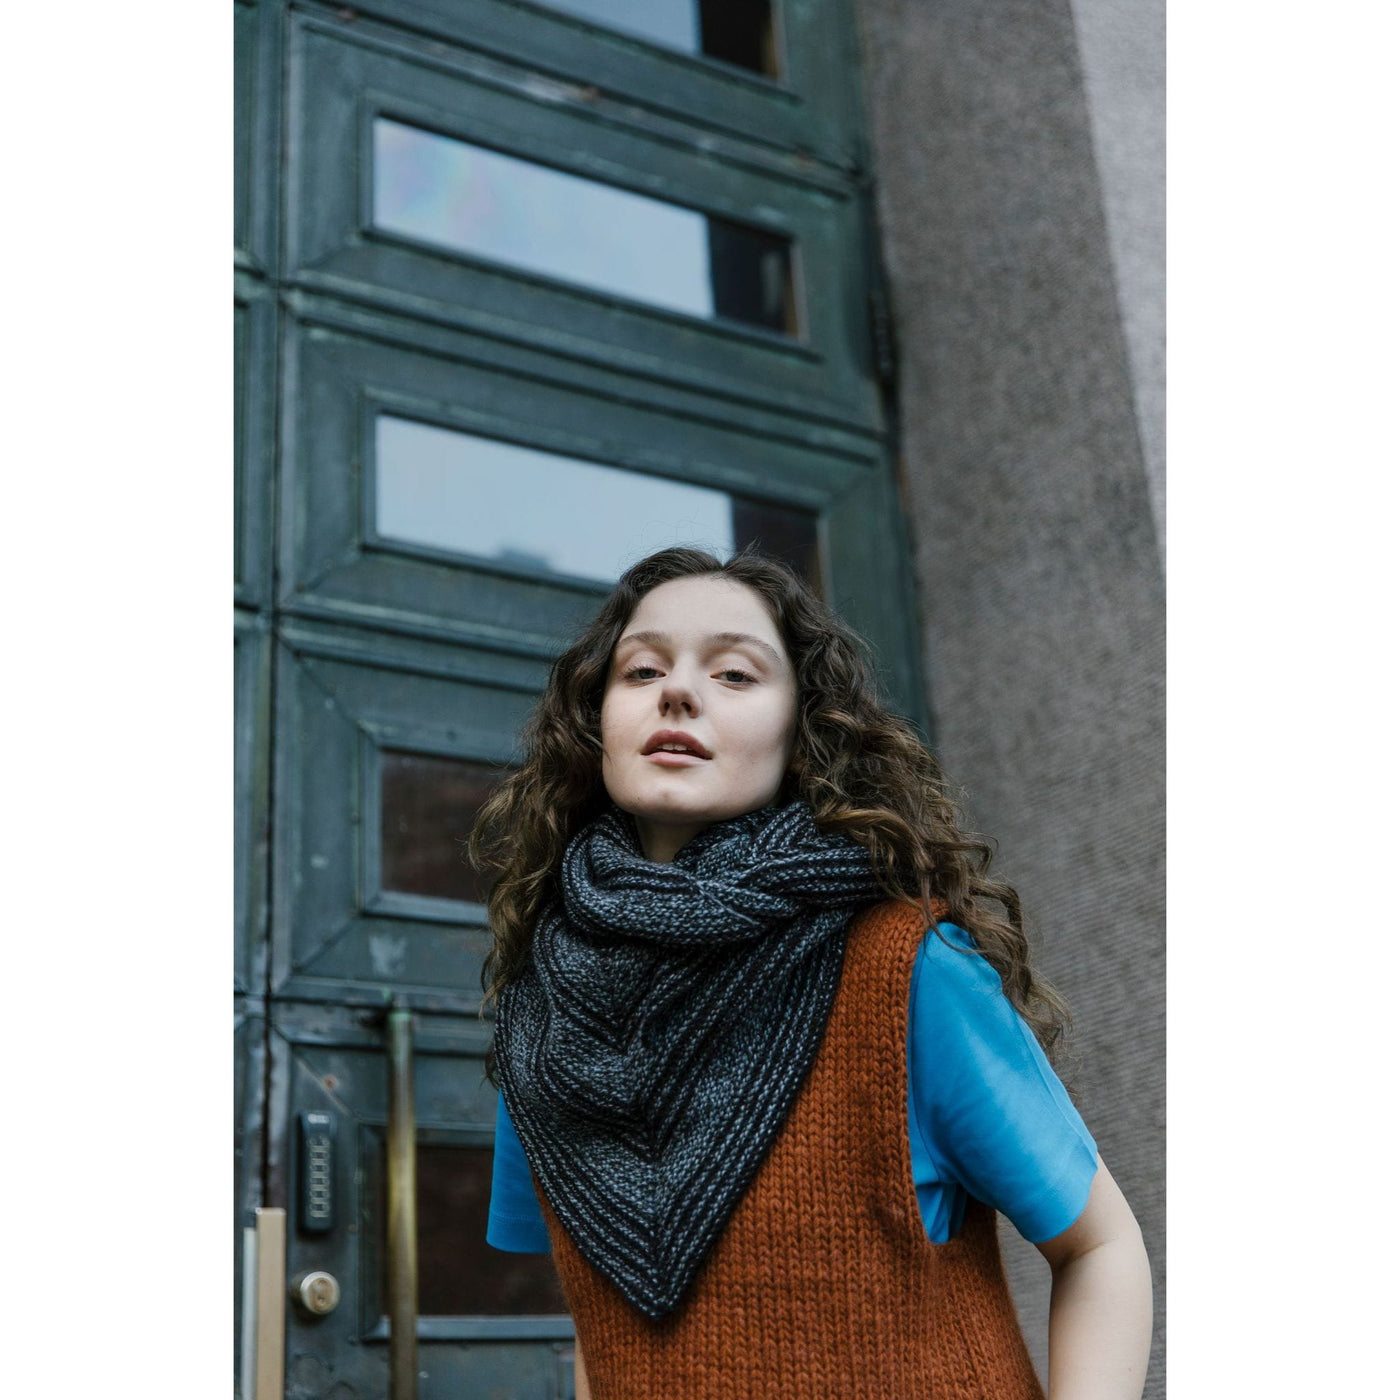 52 Weeks of Easy Knits page shows model wearing two of the knit designs in the book. Woman is standing in front of green door wearing a grey and black shawl scarf and an orange handknit vest. 